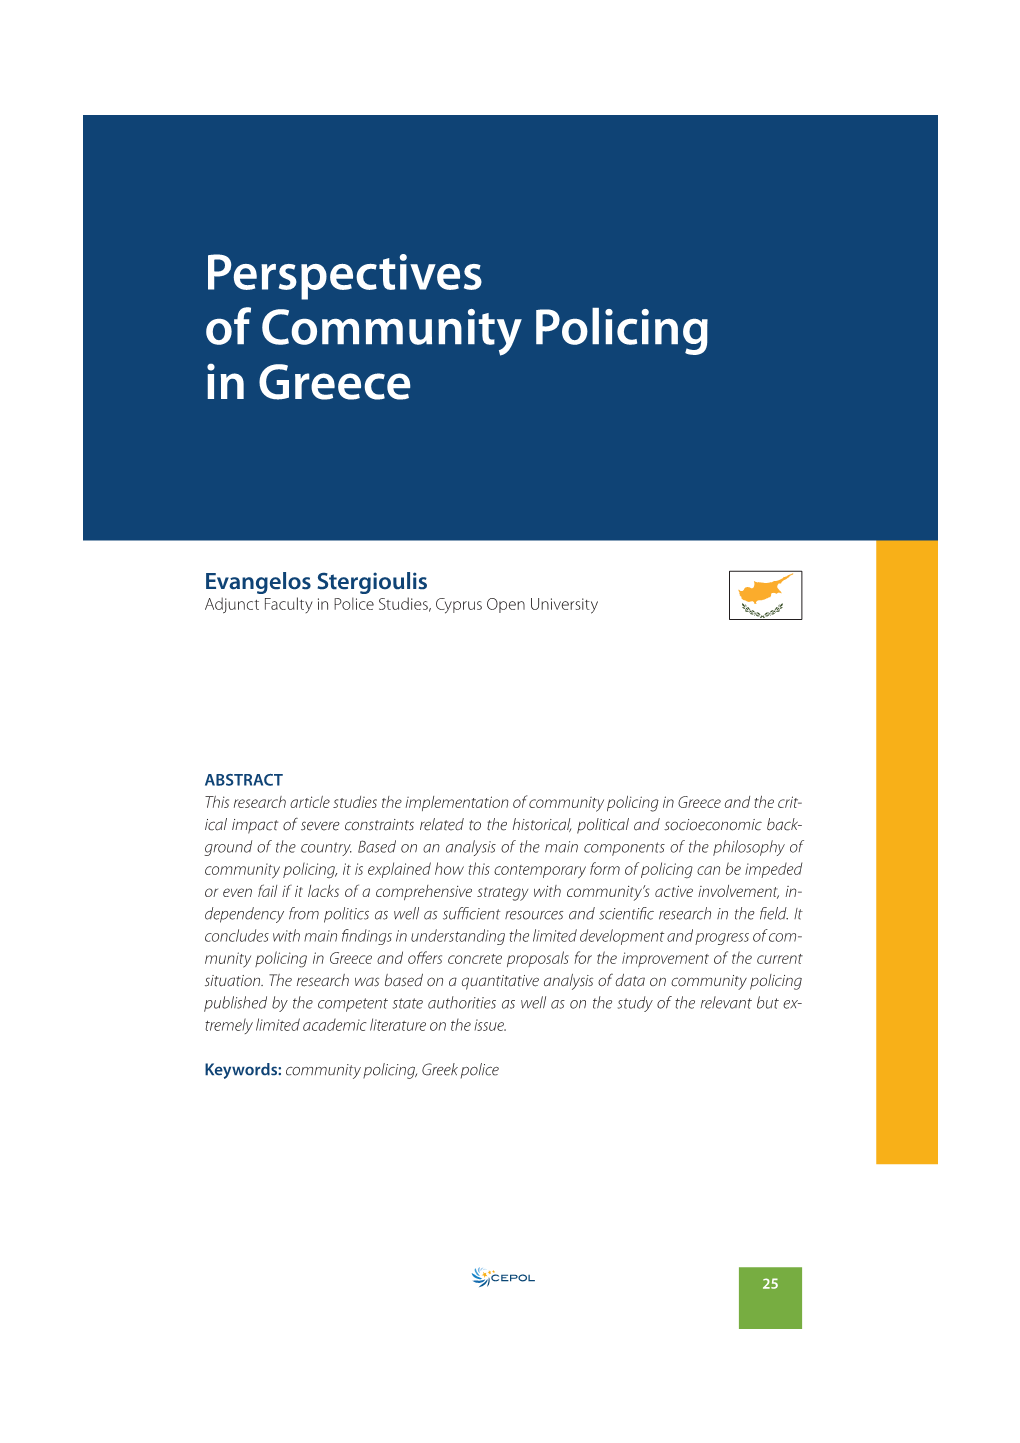 European Law Enforcement Research Bulletin \267 Issue 18 \267 Spring